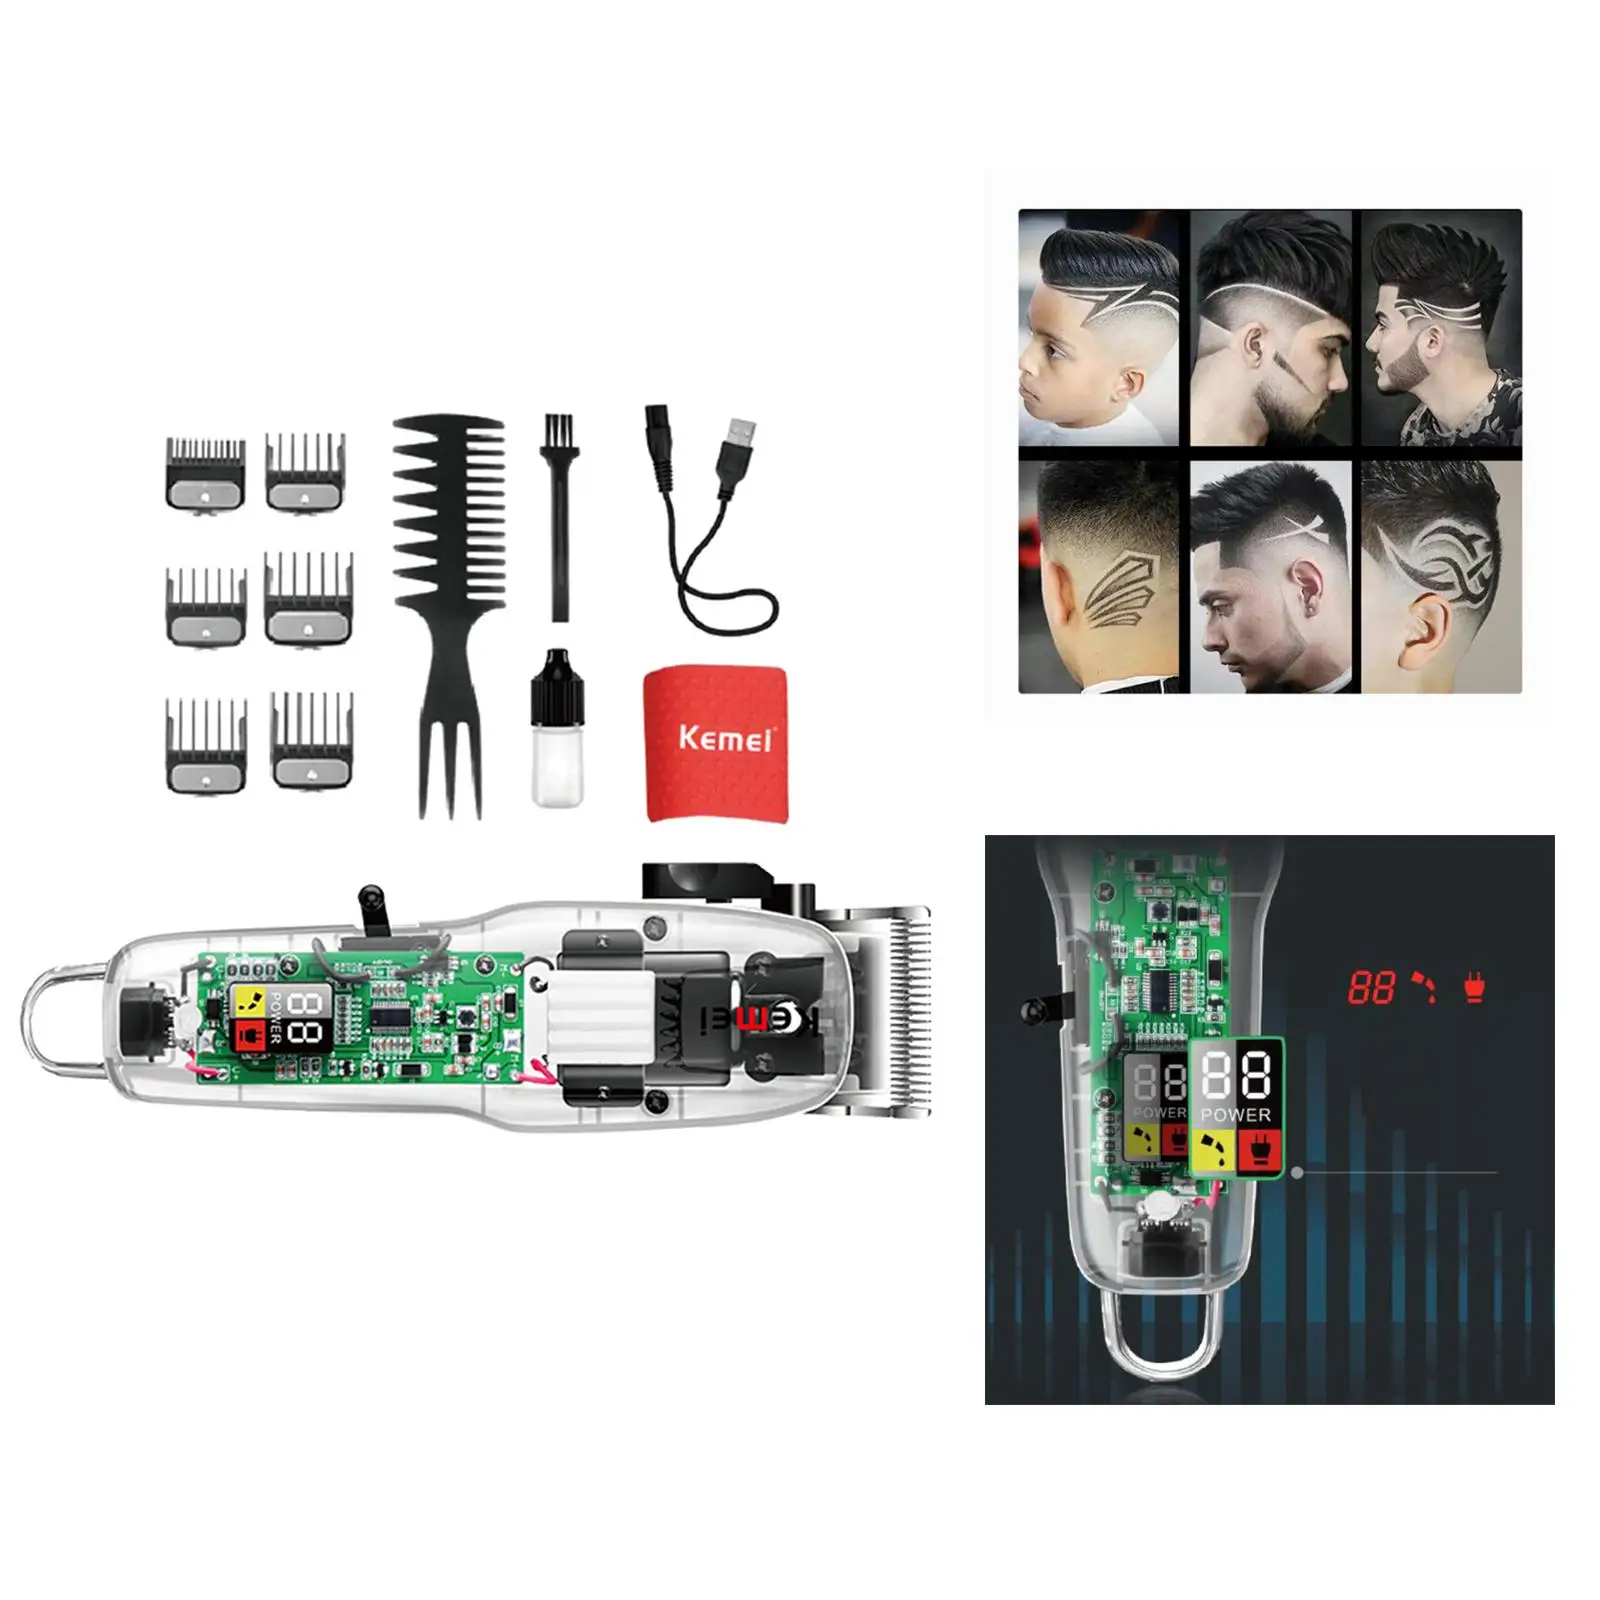 Rechargeable Hair Cutting Machine Electric Professional / // Hair Clippers/ for Men Family Boyfriend USB Fast Charging 2200mAh